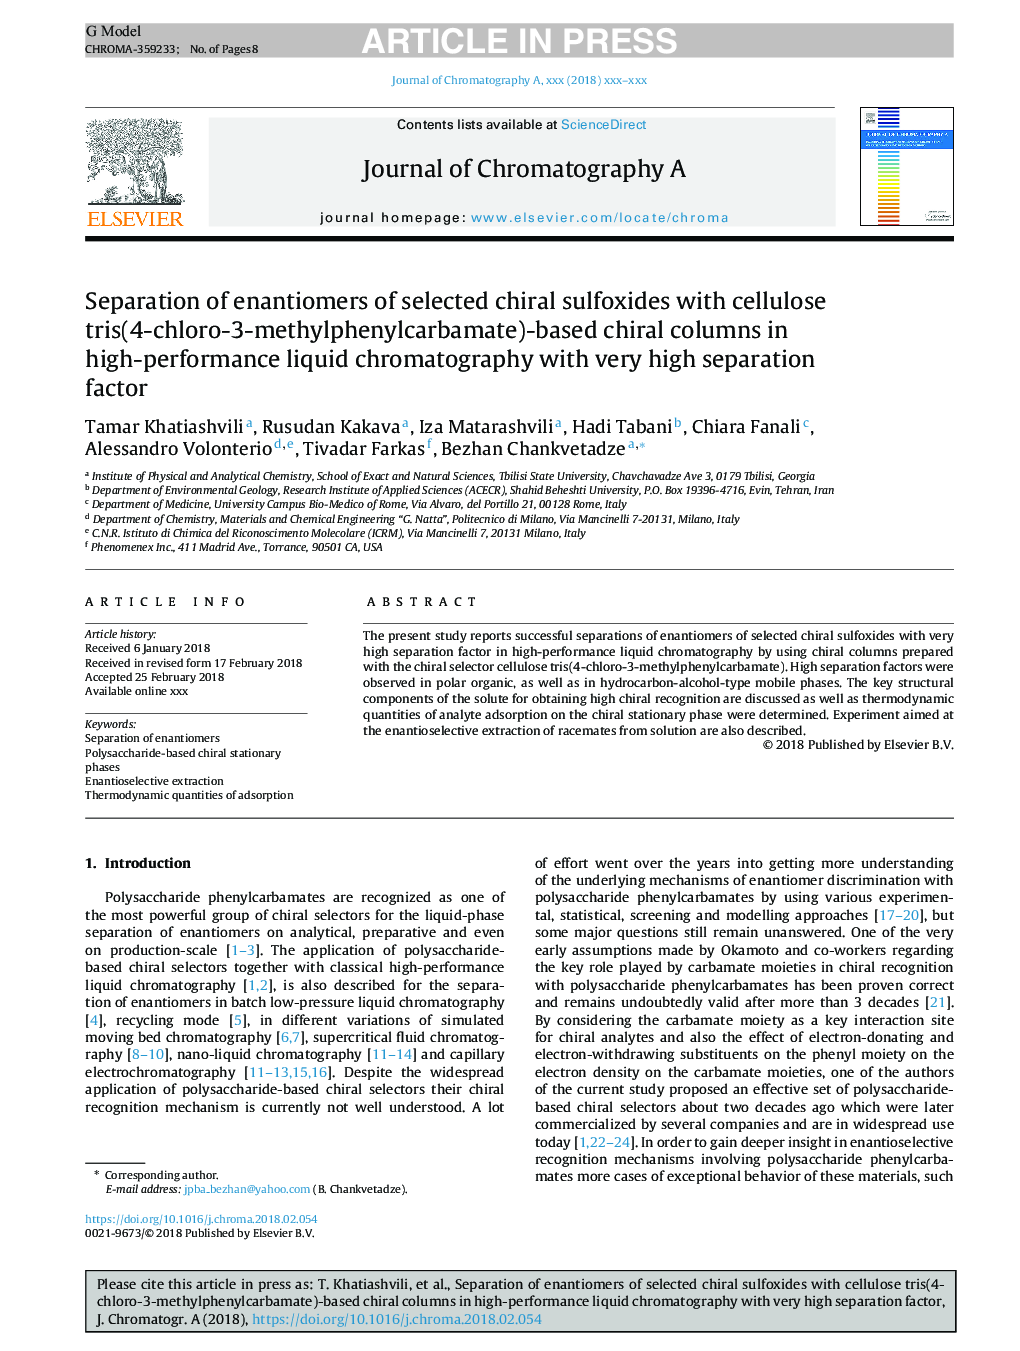 Separation of enantiomers of selected chiral sulfoxides with cellulose tris(4-chloro-3-methylphenylcarbamate)-based chiral columns in high-performance liquid chromatography with very high separation factor